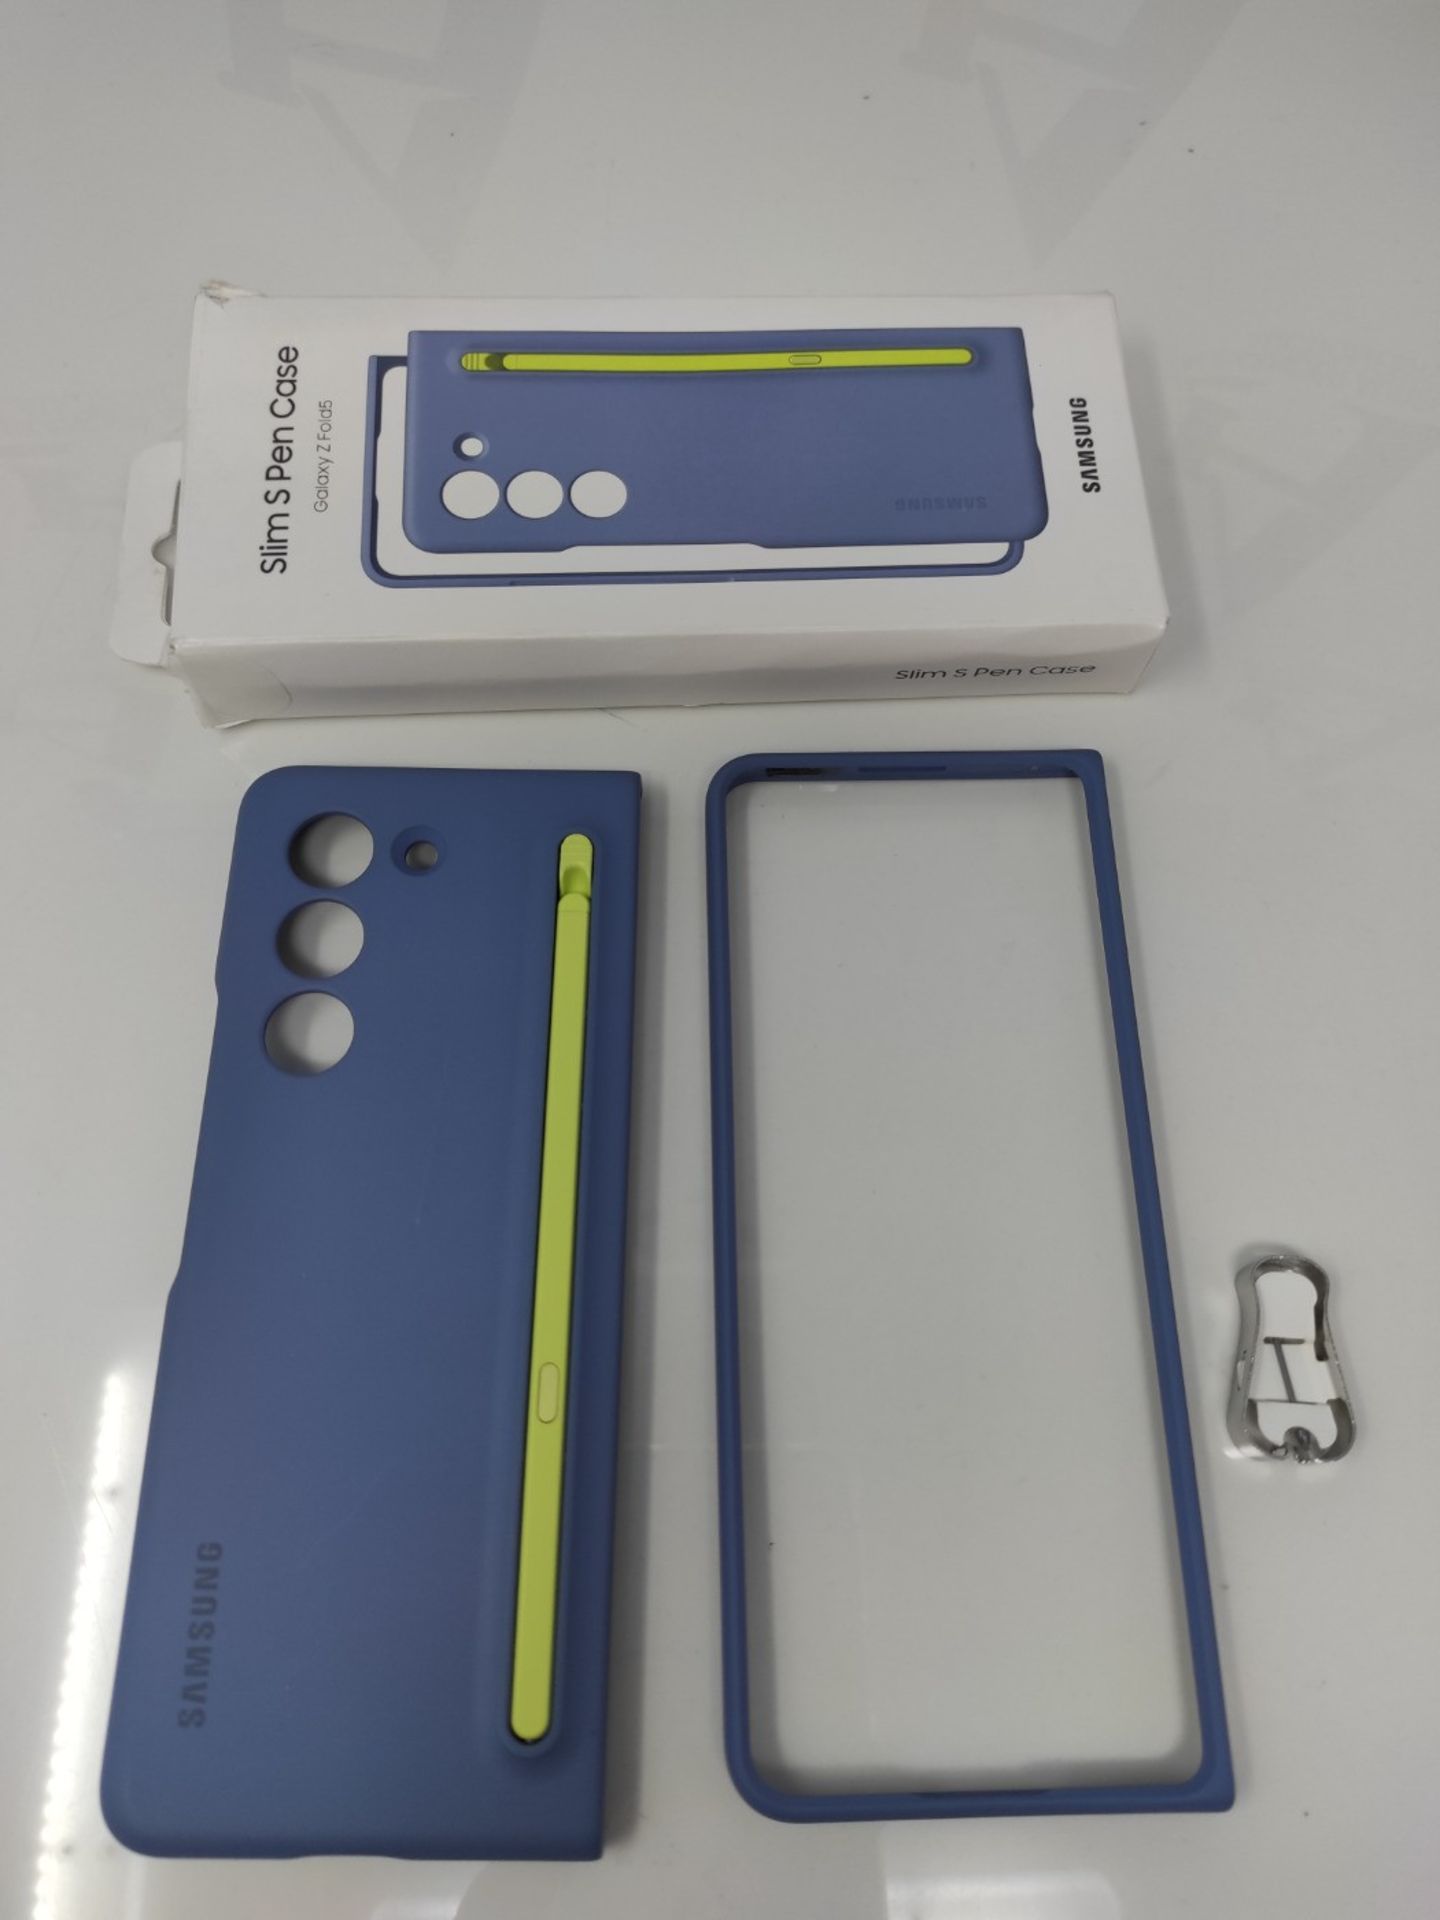 RRP £82.00 Samsung Slim S-penT Case Cover with S Pen slim design for Galaxy Z Fold5, Blue - Image 2 of 2